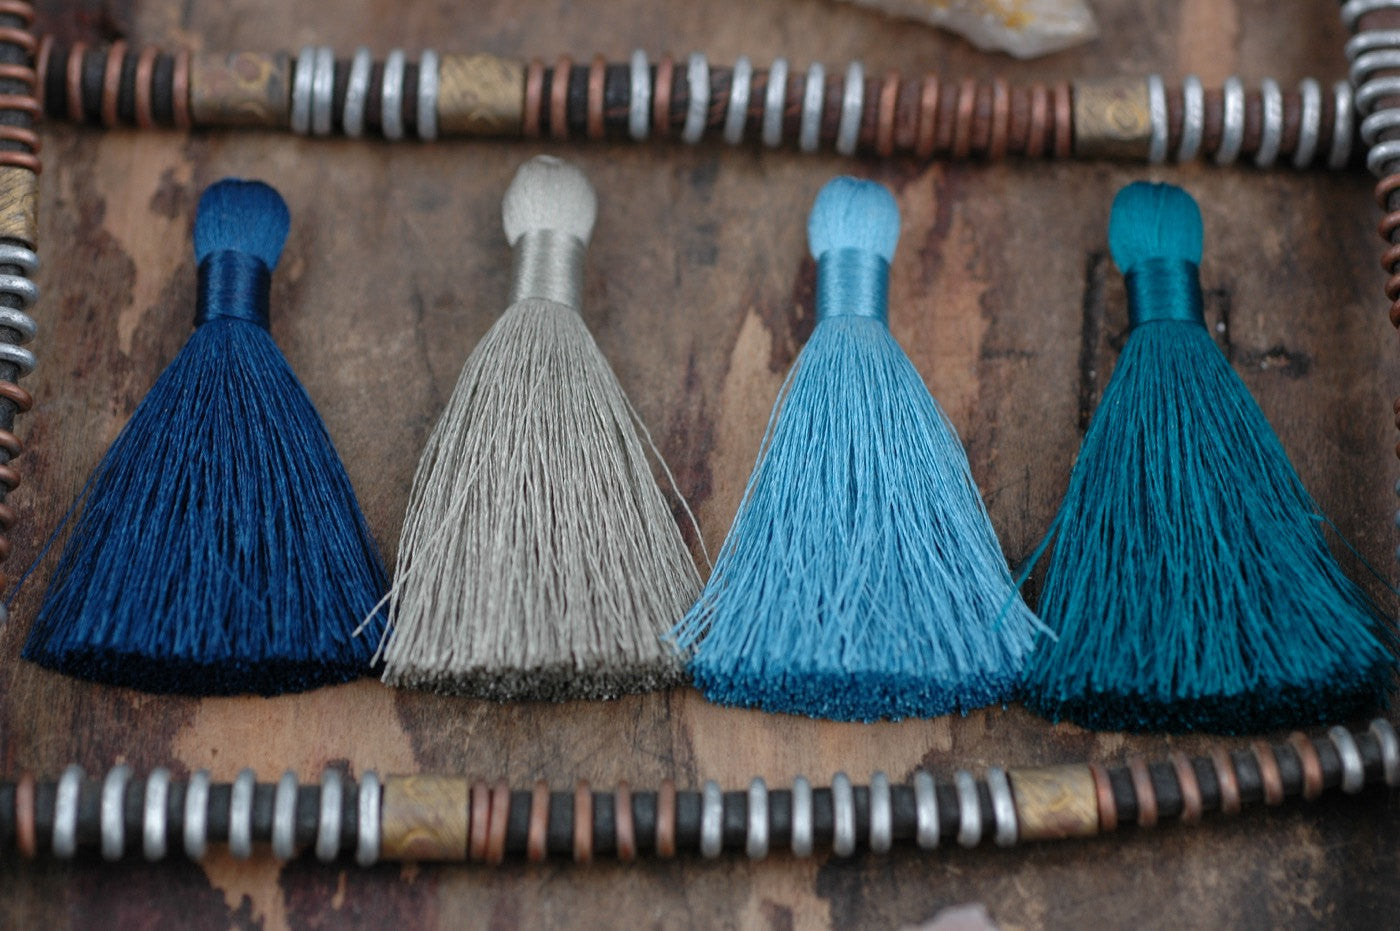 Tranquil Waters, 2" Silky Tassel Mixed Pack, 4 pieces - ShopWomanShopsWorld.com. Bone Beads, Tassels, Pom Poms, African Beads.